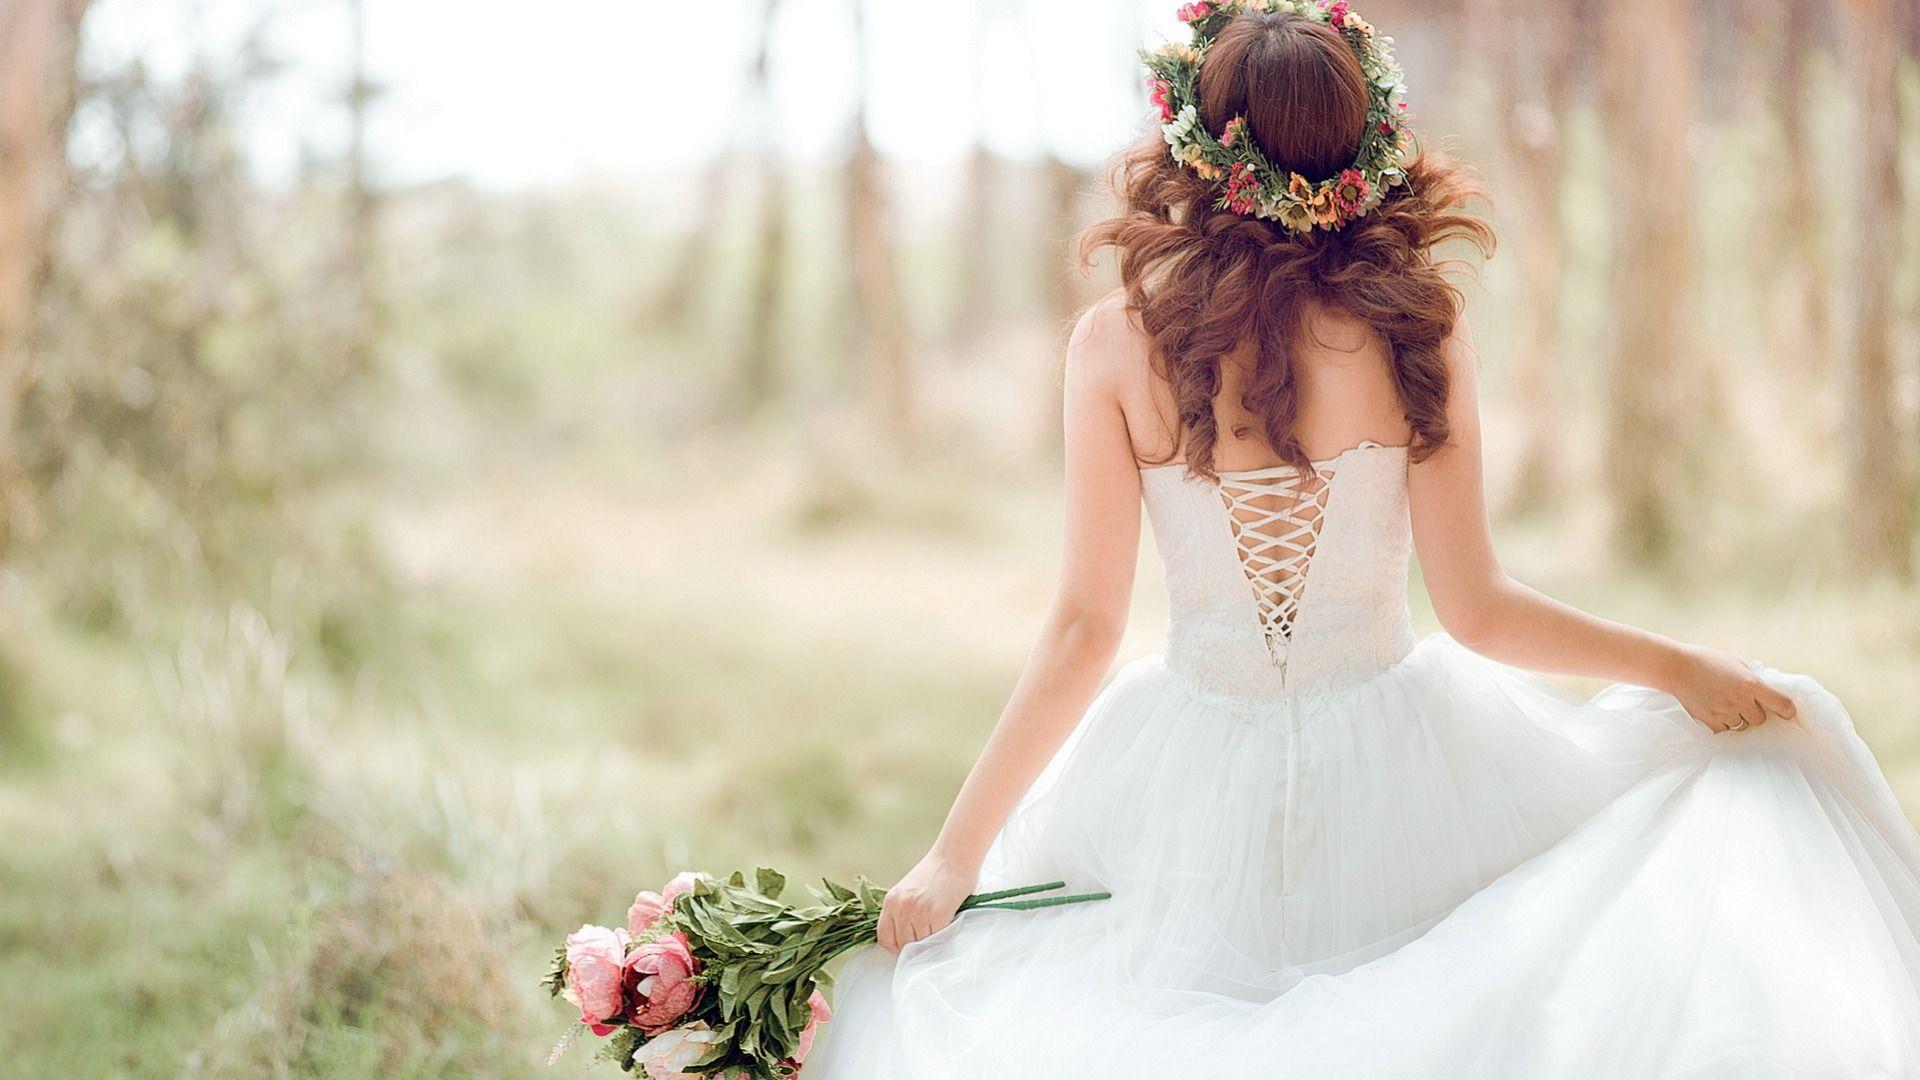 White Bride Dress 2014 Crown And Bouquet Wallp 2346 Full HD